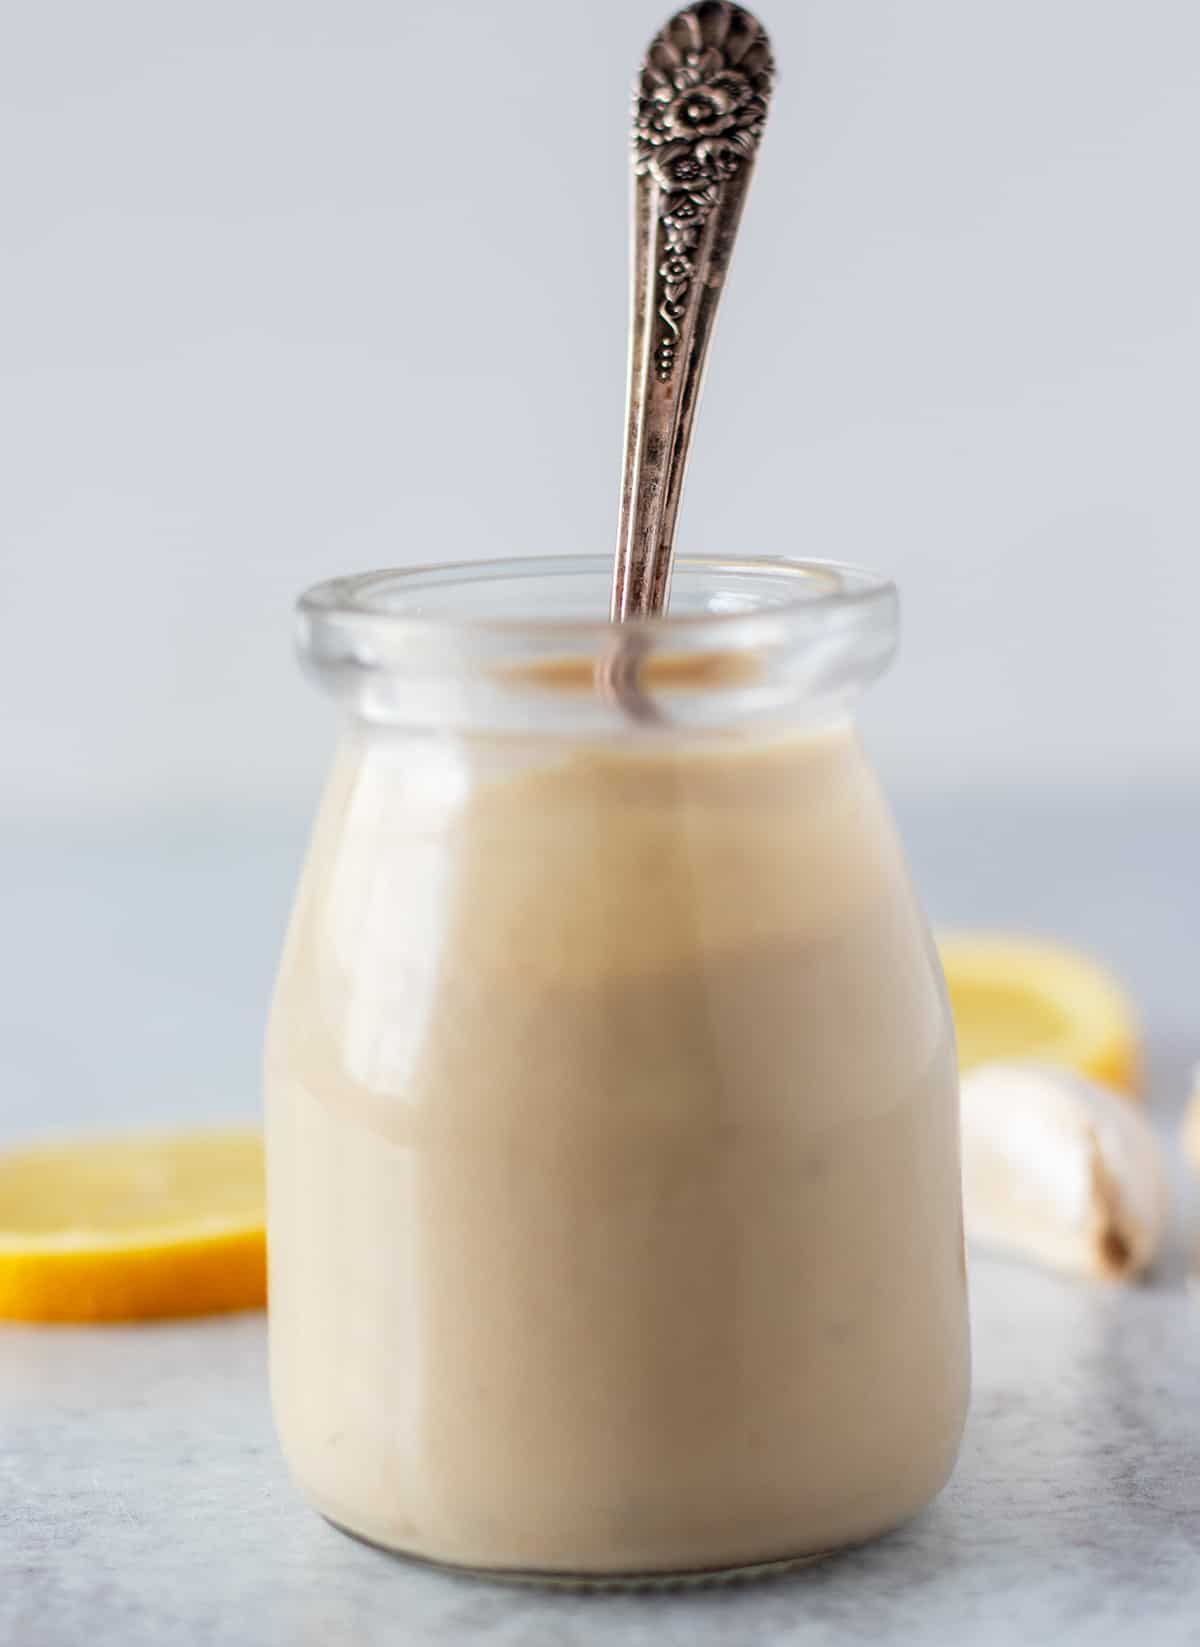 tahini dressing in a glass jar with lemon slices and garlic cloves in the background. a silver spoon in the jar for serving.